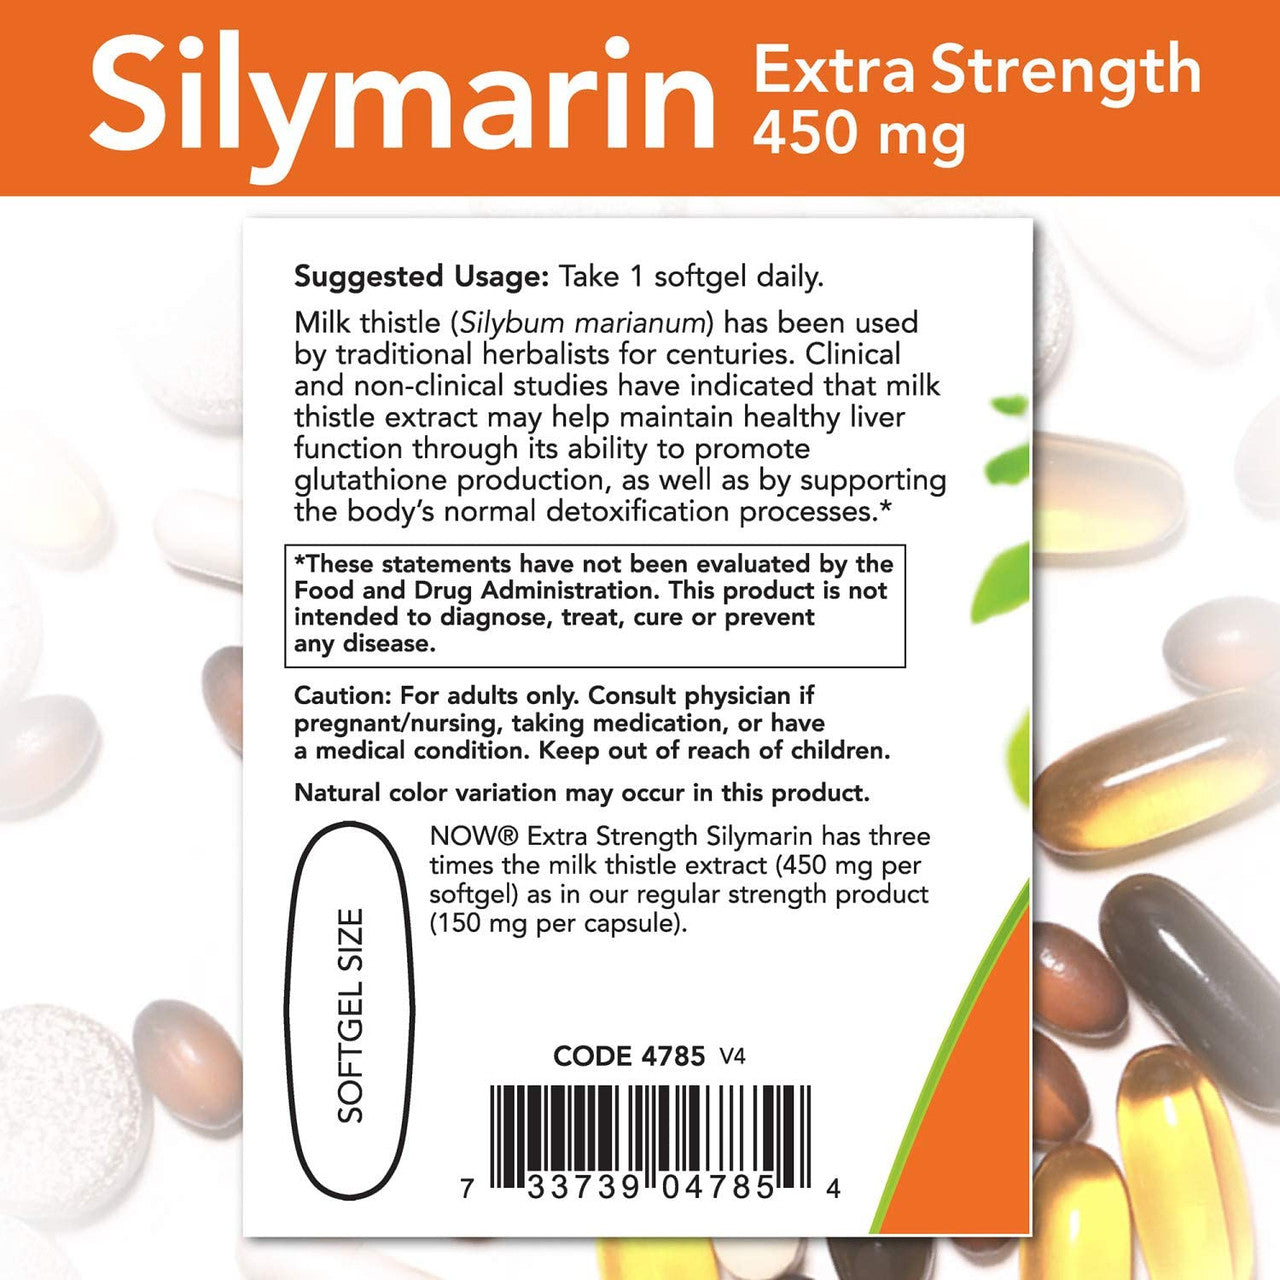 Now Extra Strength Silymarin 450 mg directions